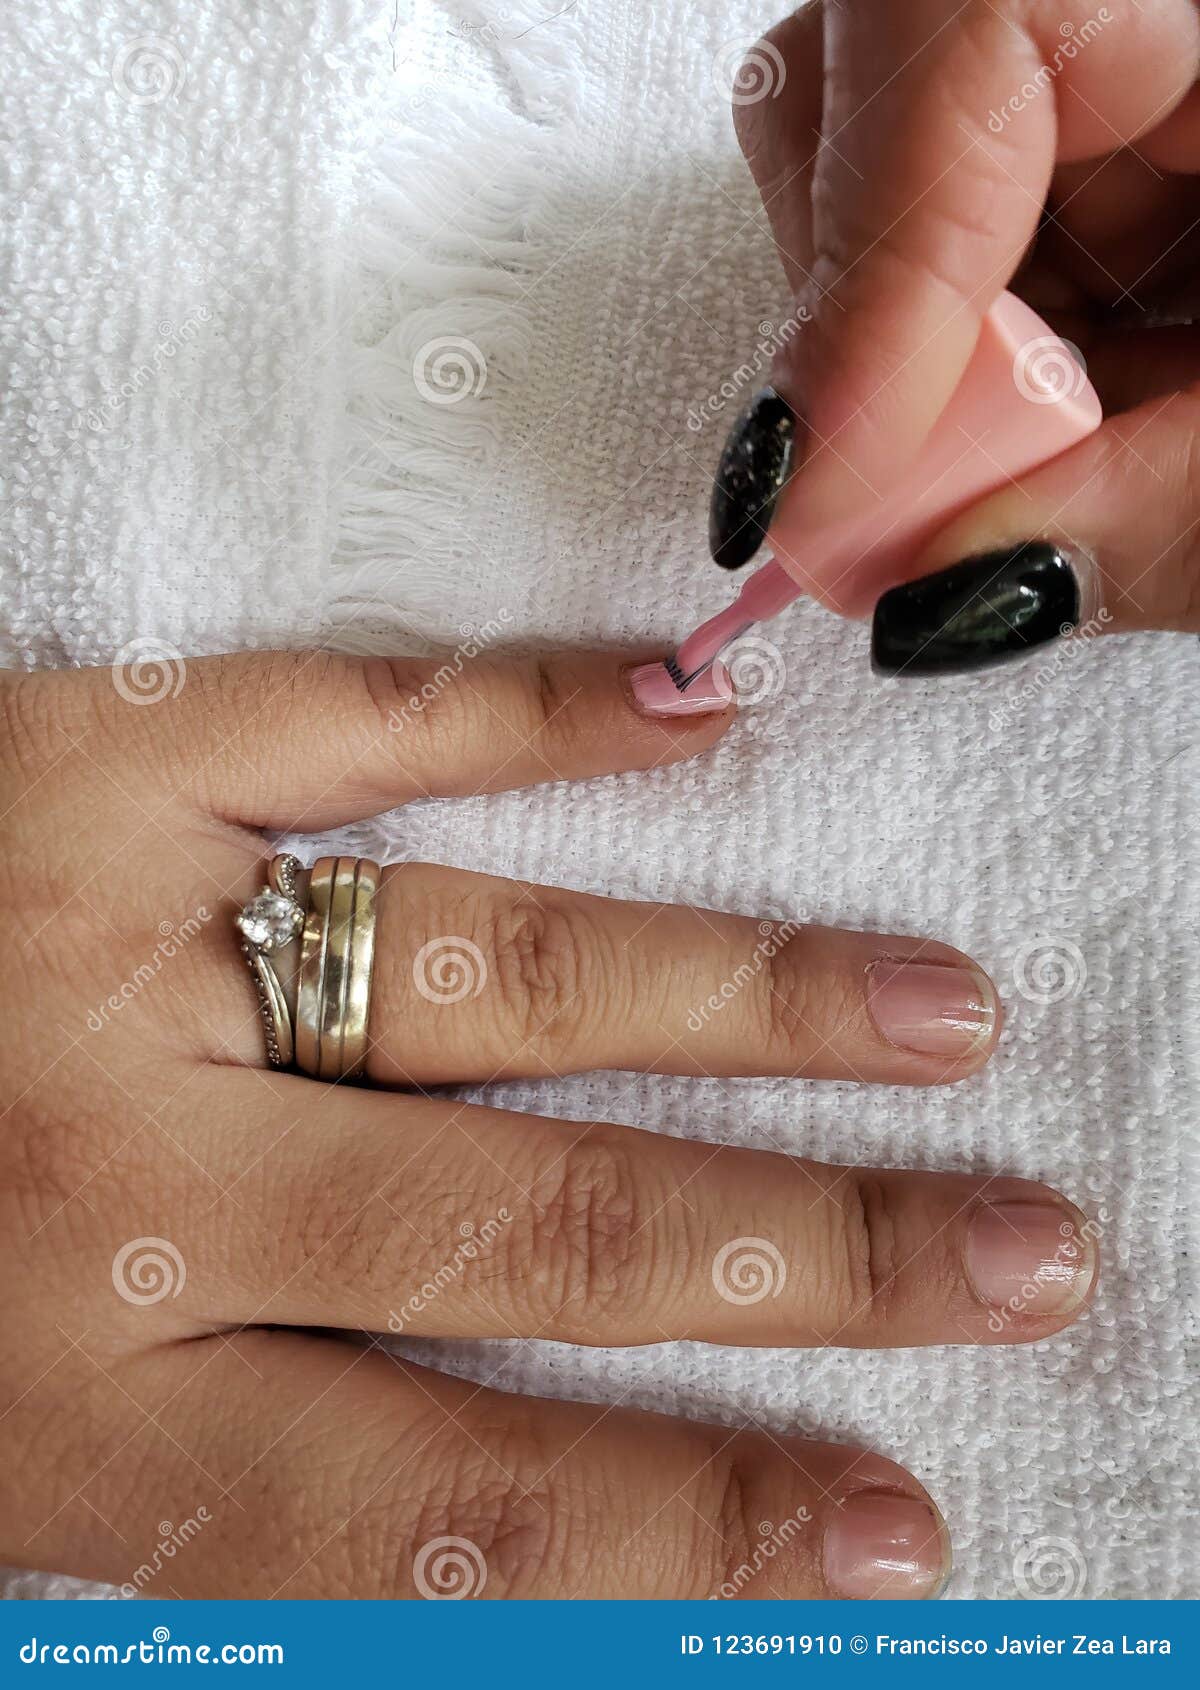 woman painting the fingernails of another woman with pink nail polish